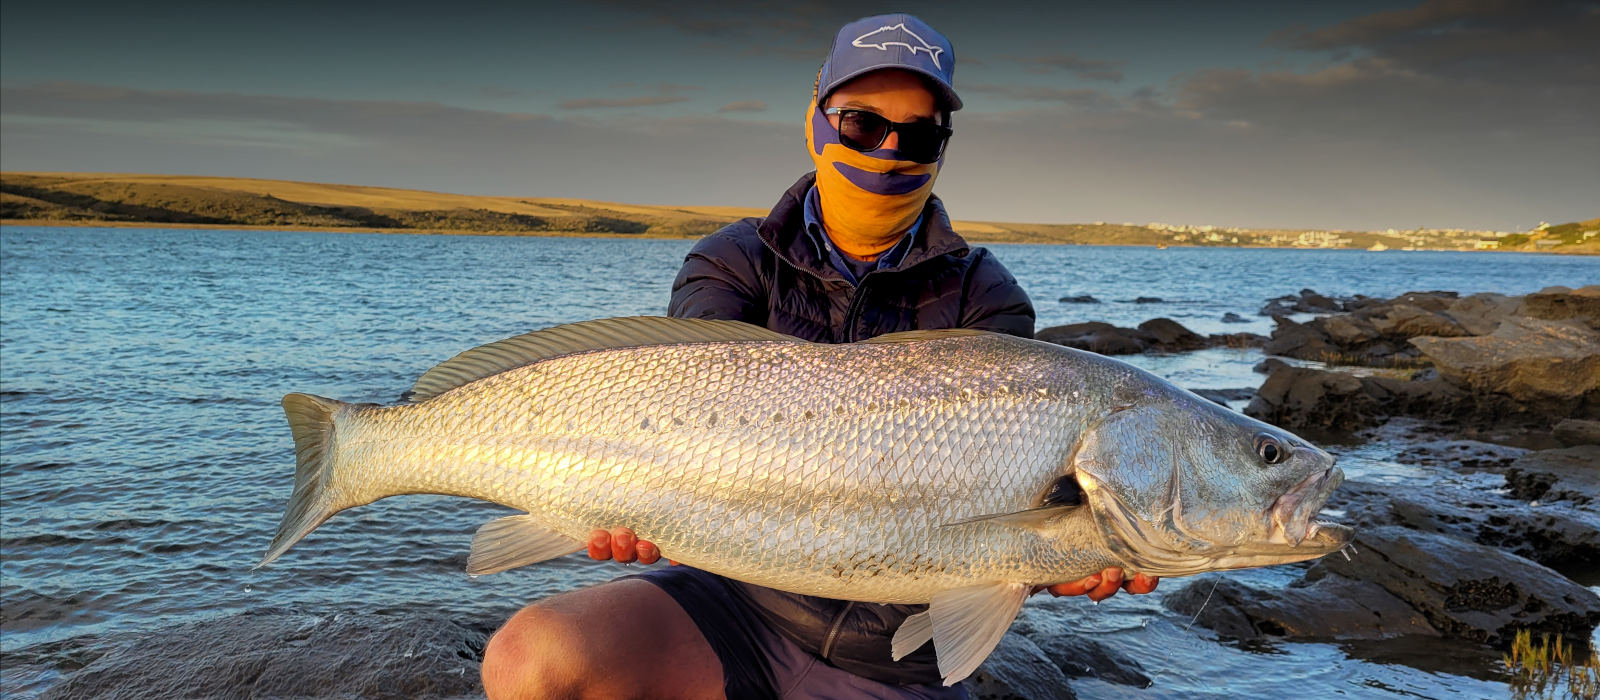 BIG CATCH  THE CAPE'S PREMIER FISHING TACKLE SUPPLIER